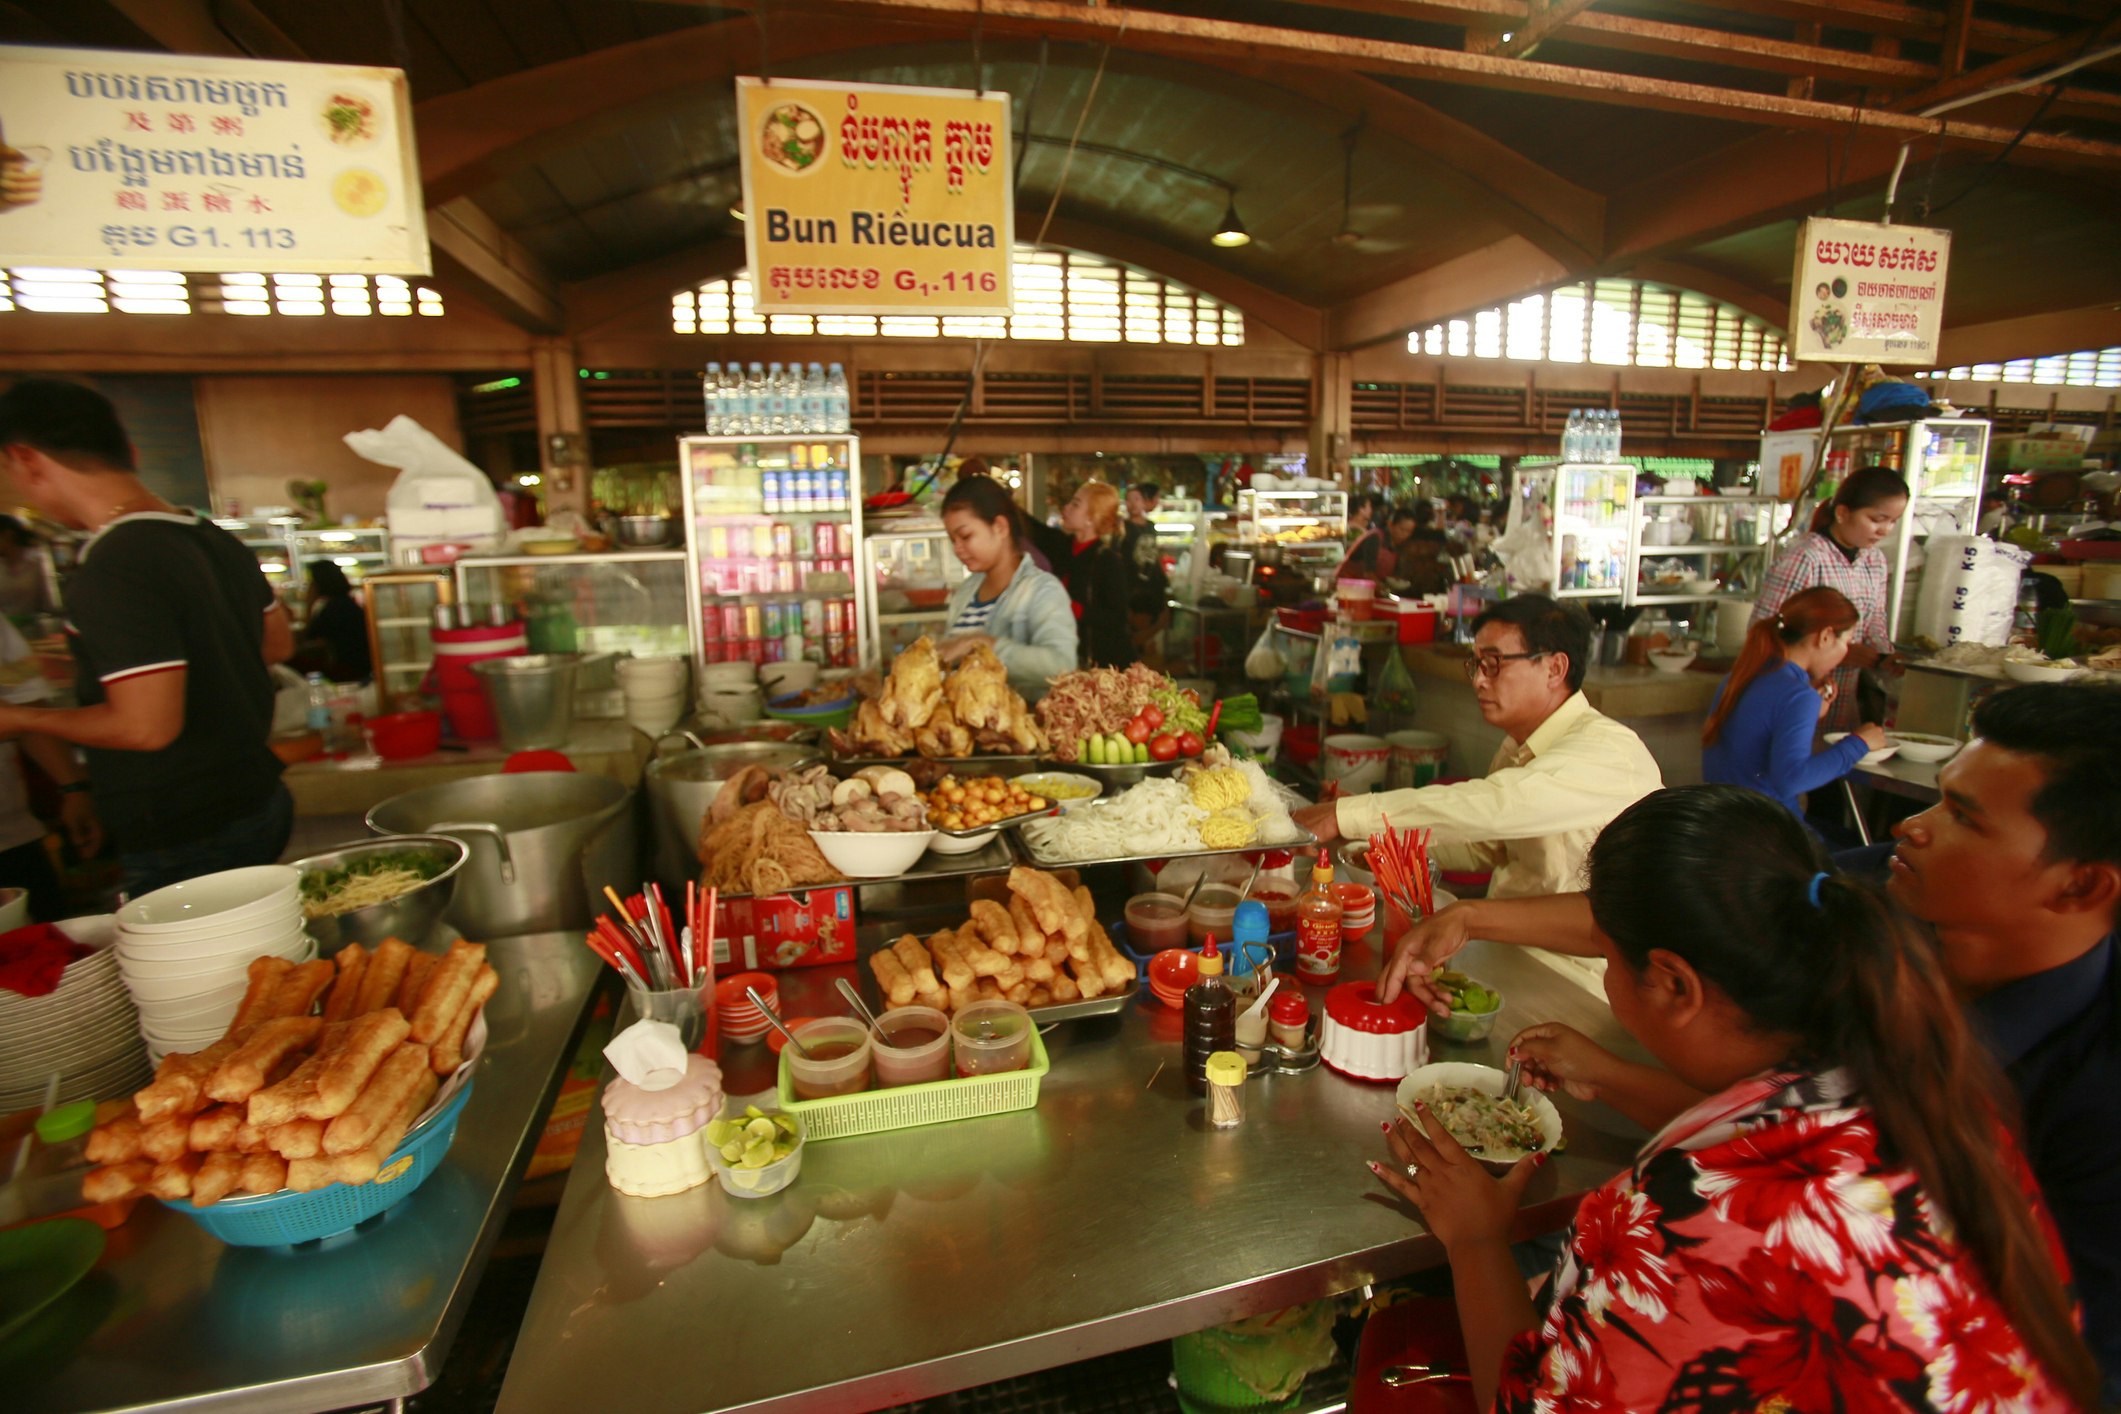 Dining at street food markets in cities like Phnom Penh is a great way to save money